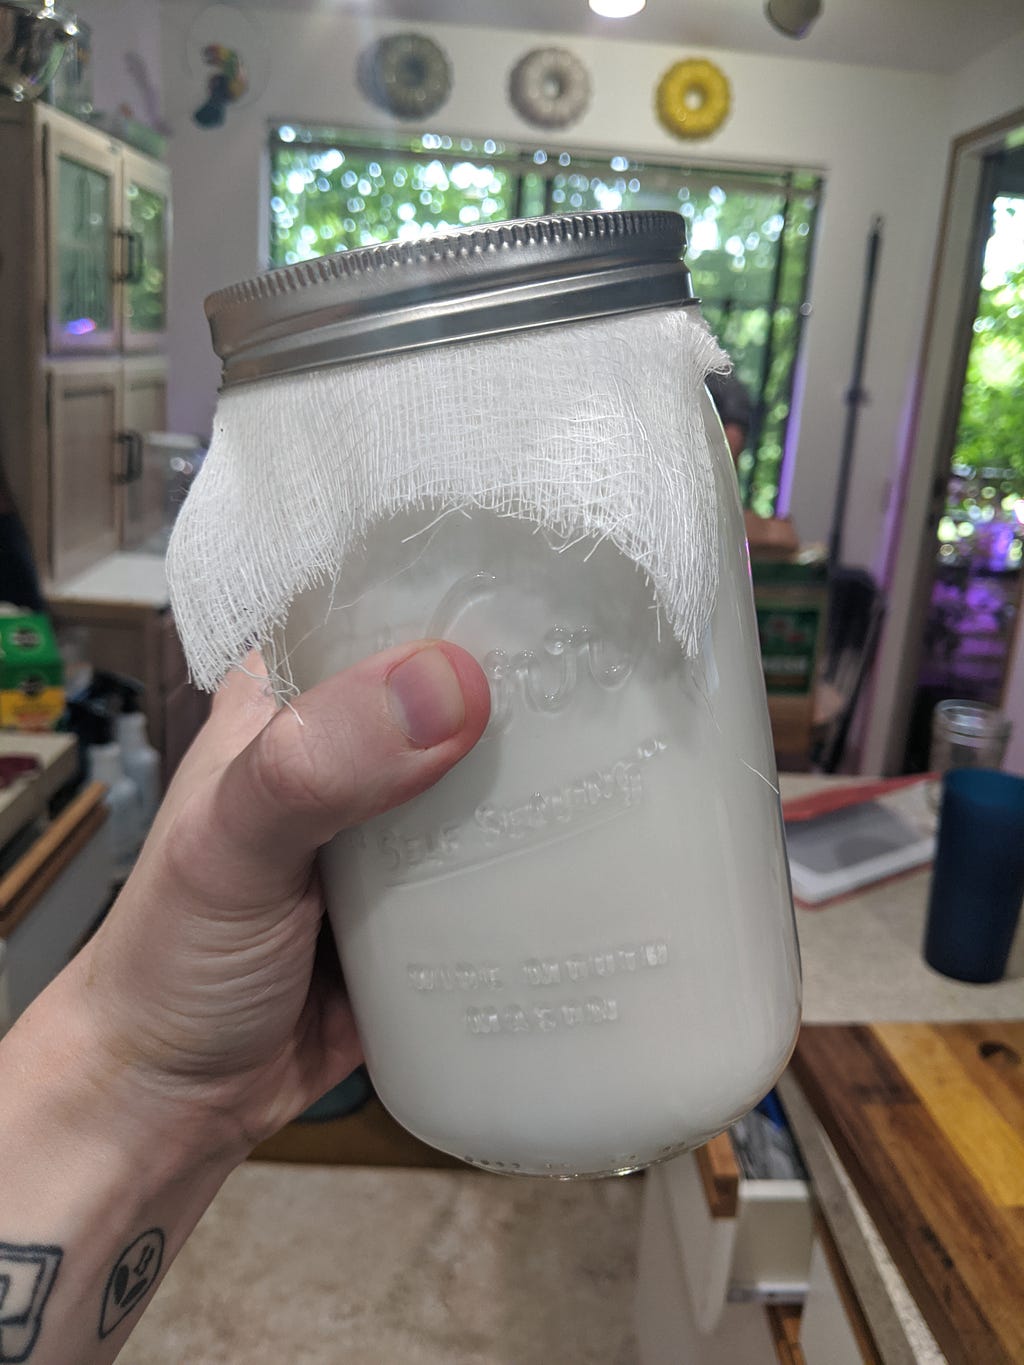 An image of a mason jar filled with coconut milk to become yogurt, held up in a bright kitchen setting.